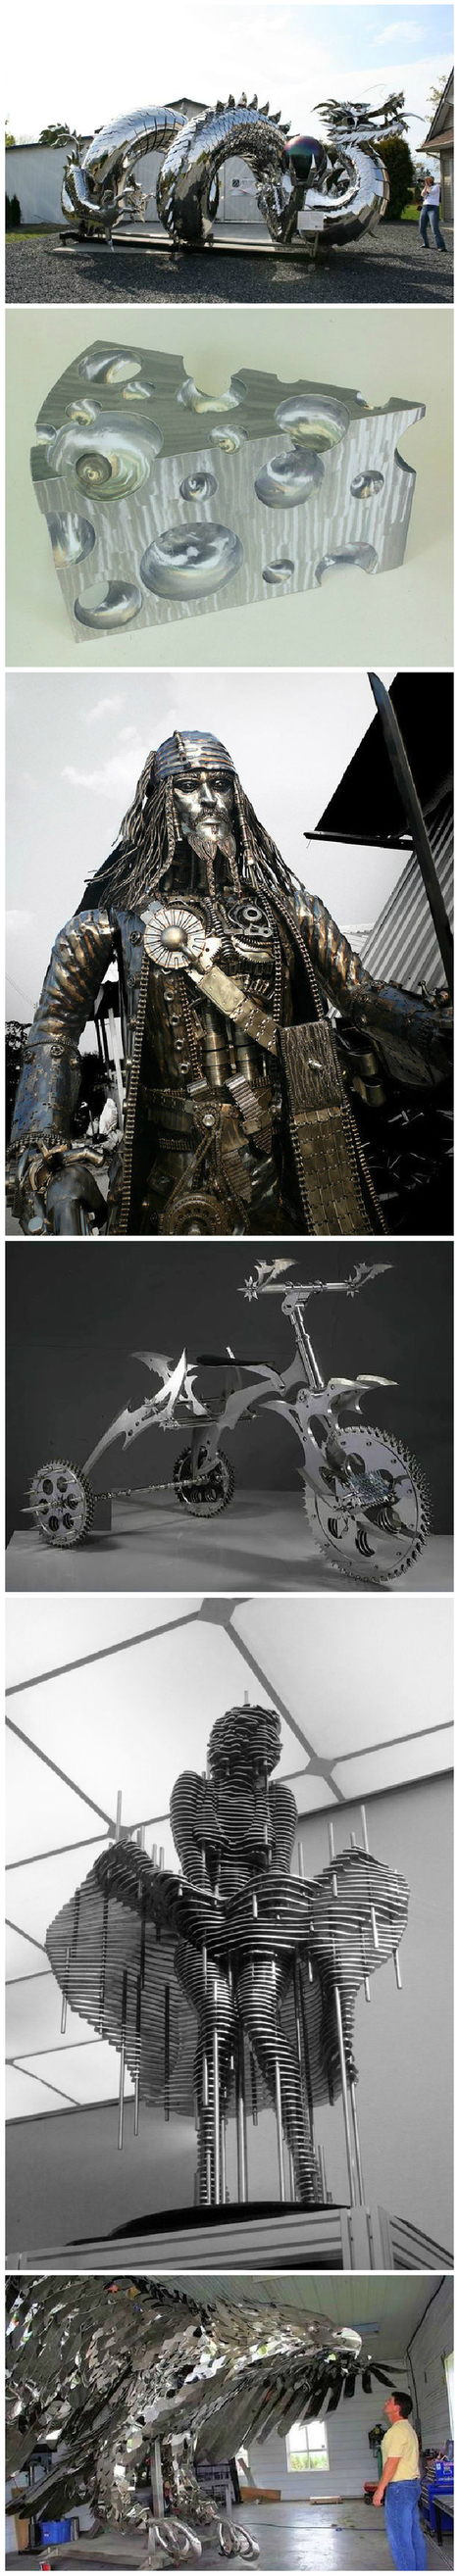 Incredible Sculptures Made From Metal